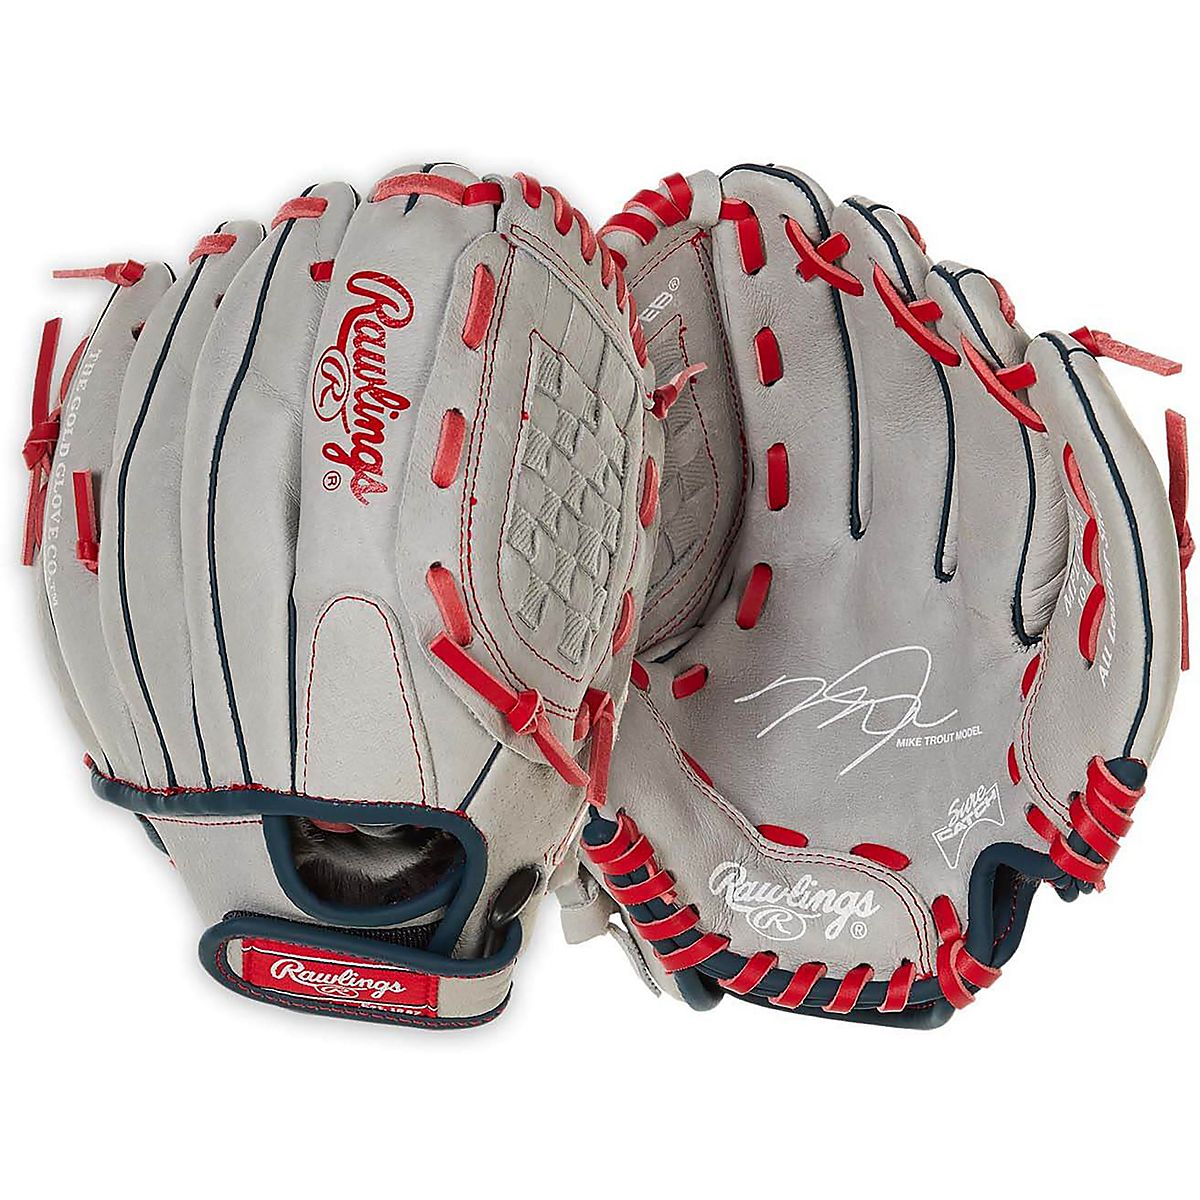 What Glove Does Mike Trout Wear?